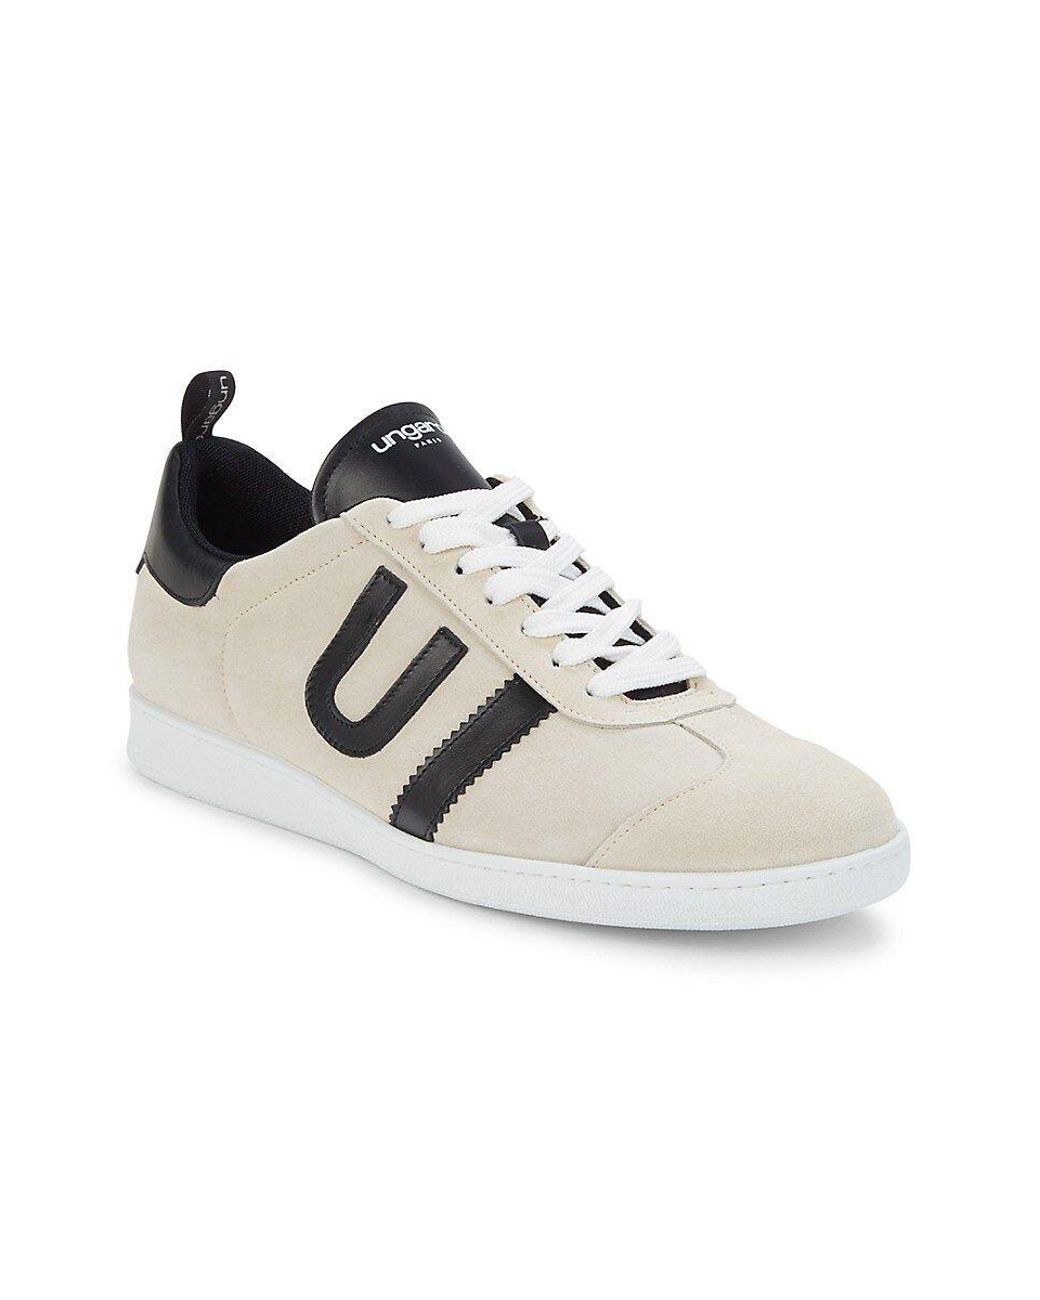 Emanuel Ungaro Leather & Suede Sneakers in White | Lyst